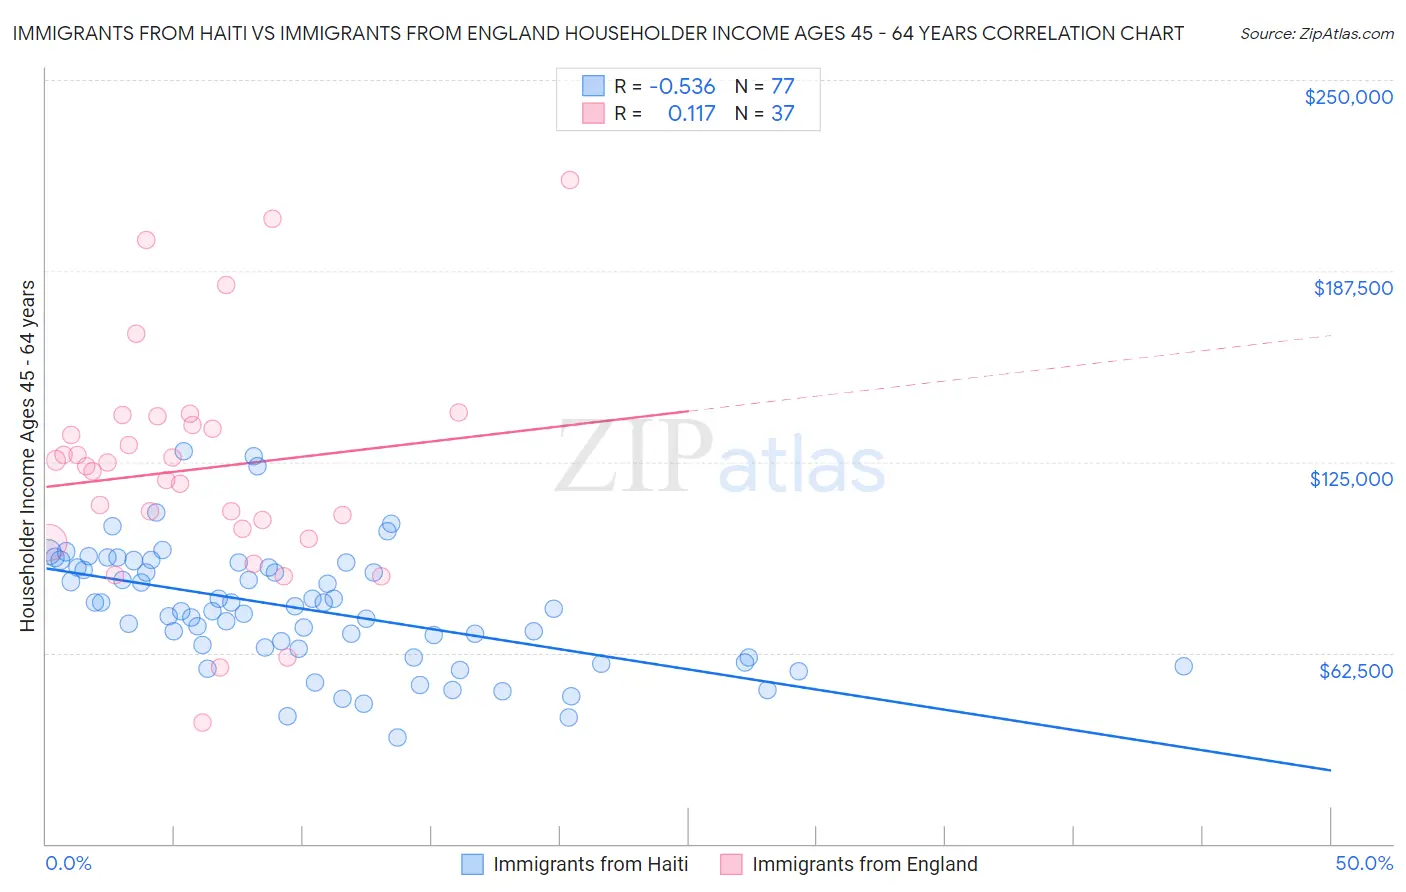 Immigrants from Haiti vs Immigrants from England Householder Income Ages 45 - 64 years